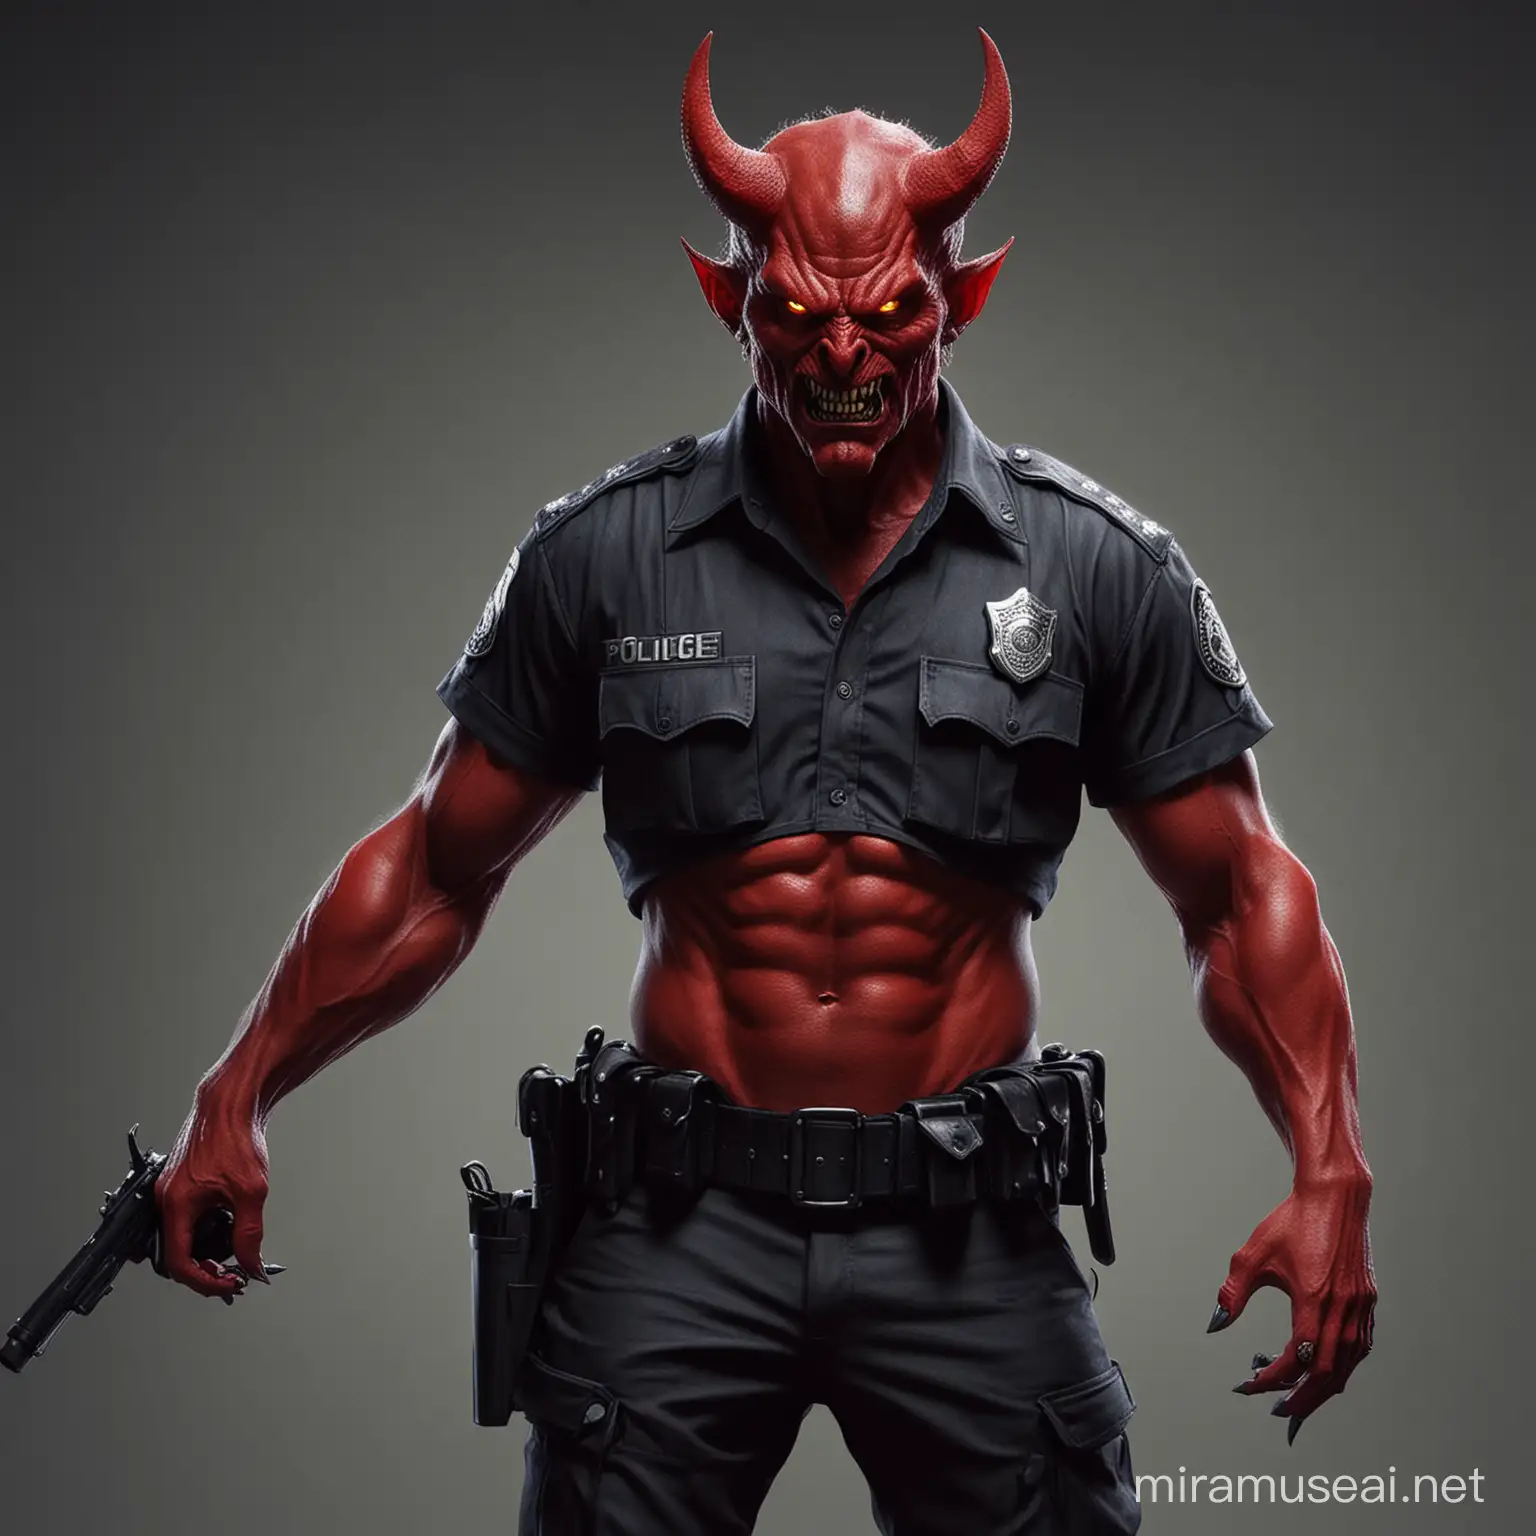 Police Officer Confronts Fiery Red Demon